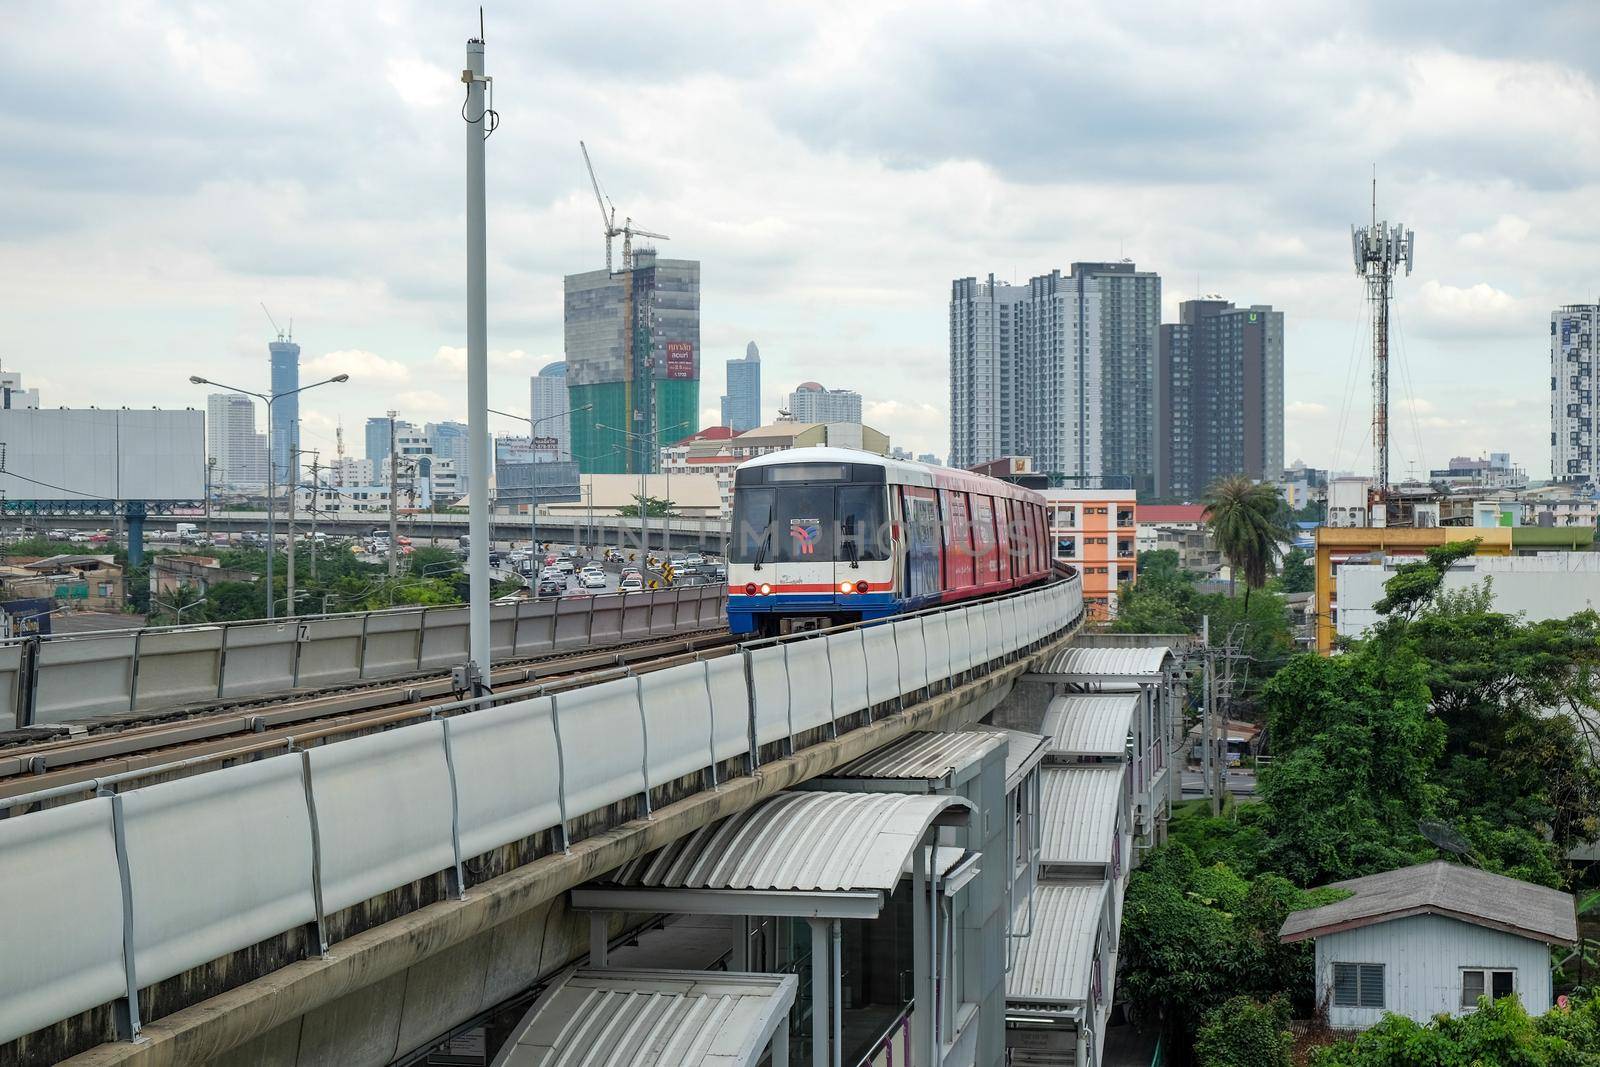 Bangkok-Thailand NOV 9 2017: BTS Sky train mass transit system in Bangkok to help facilitate and speed the journey.